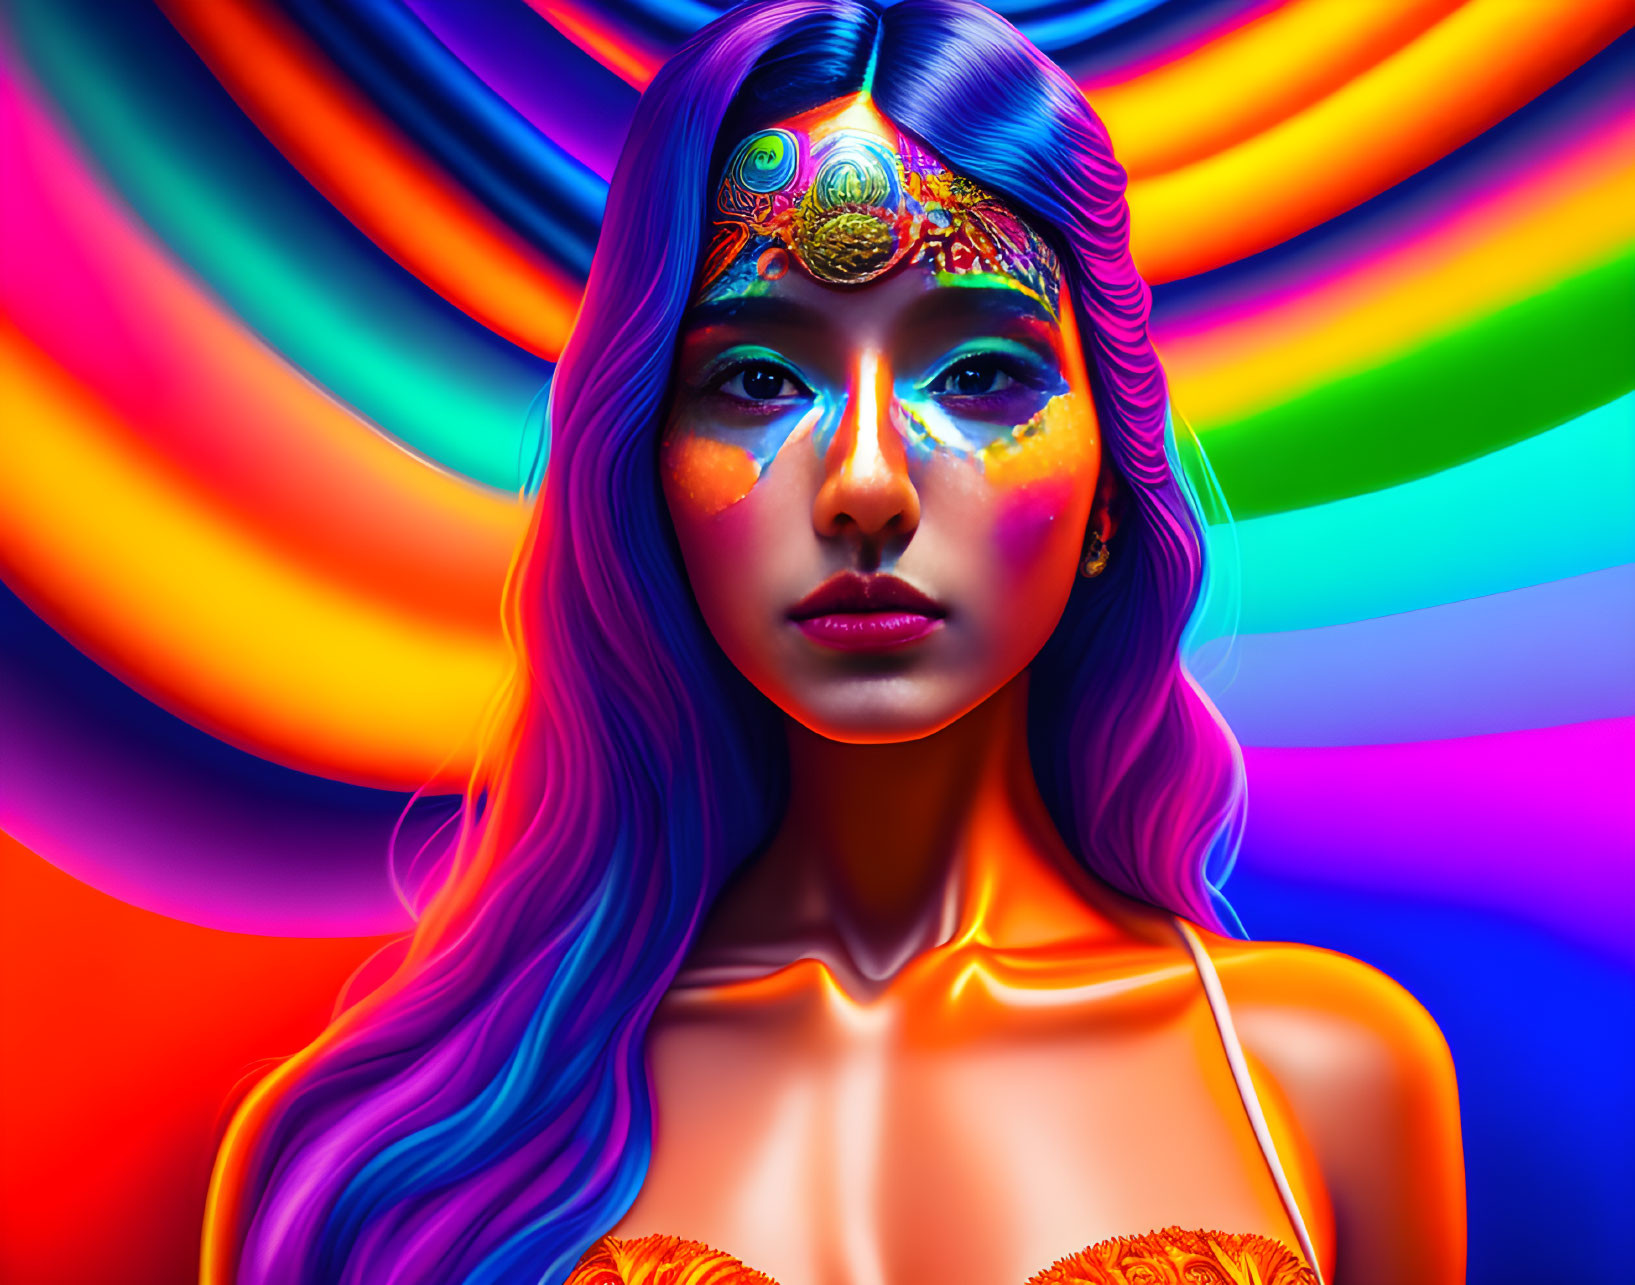 Colorful portrait of a woman with blue-purple hair and face paint on rainbow backdrop